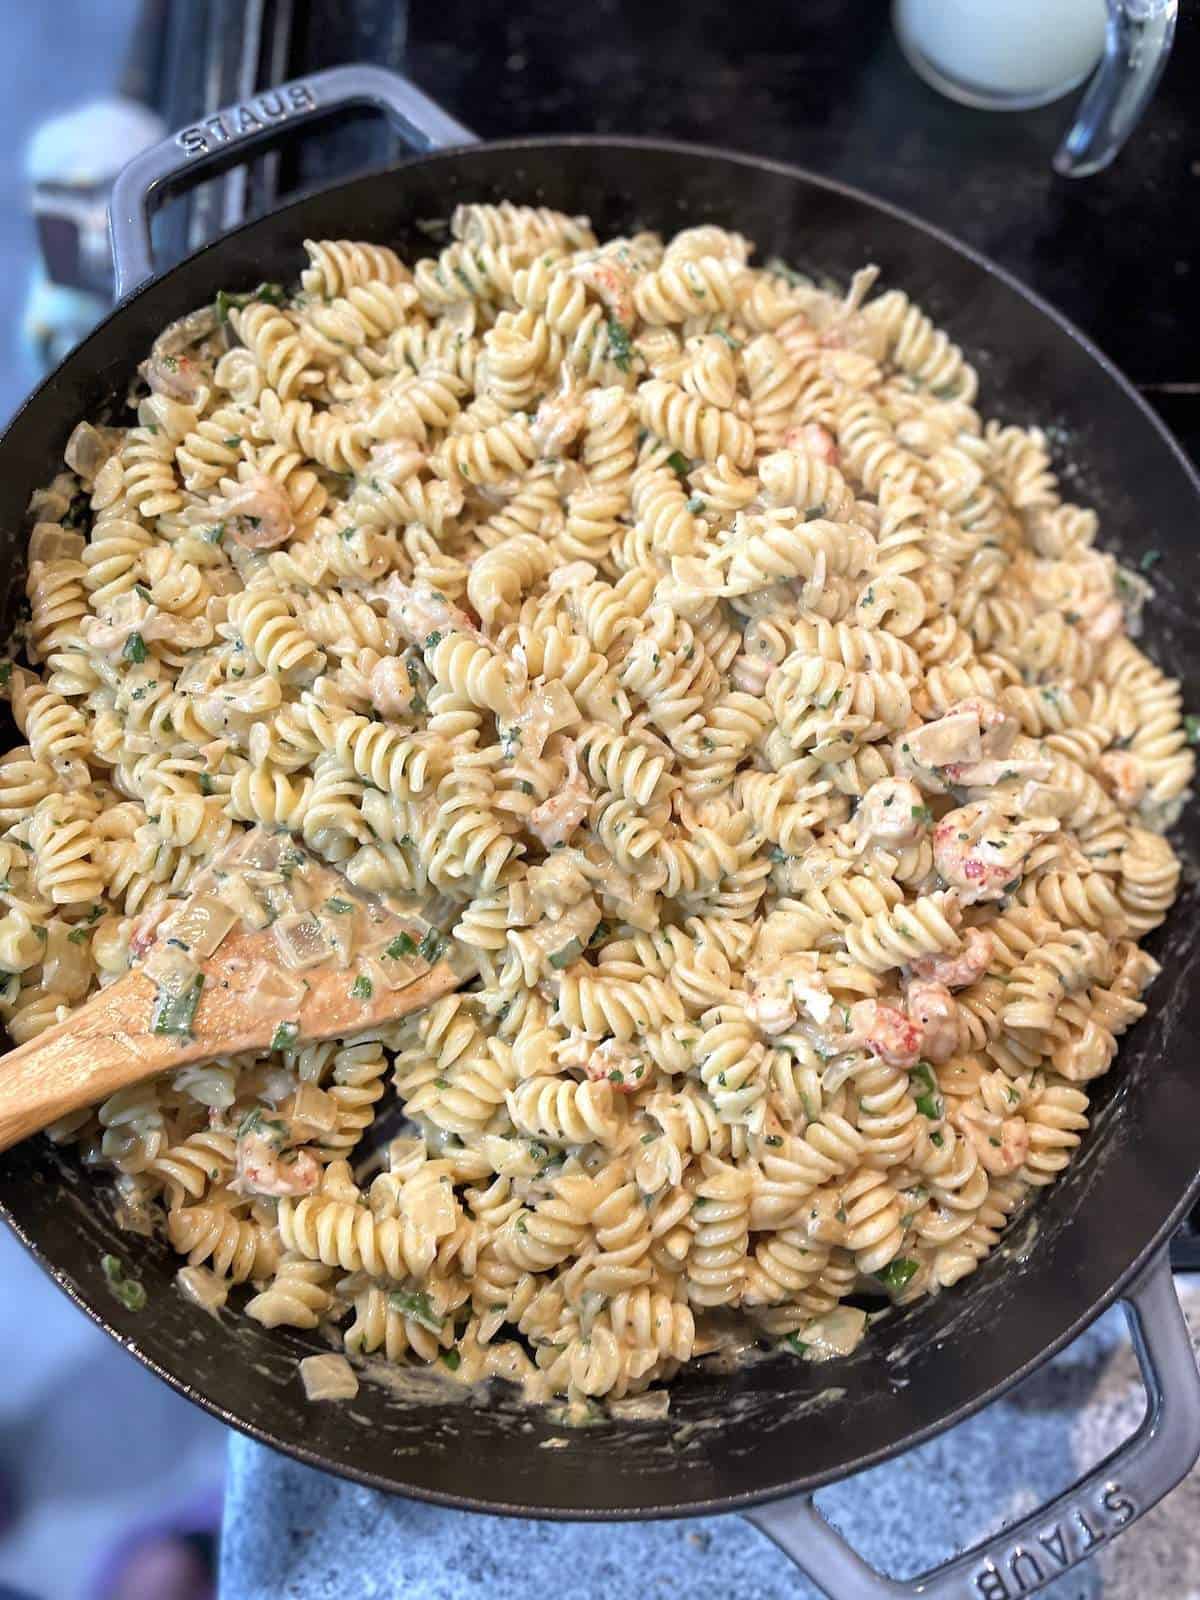 A skillet filled with rotini pasta, crawfish, and creamy crawfish monica sauce.